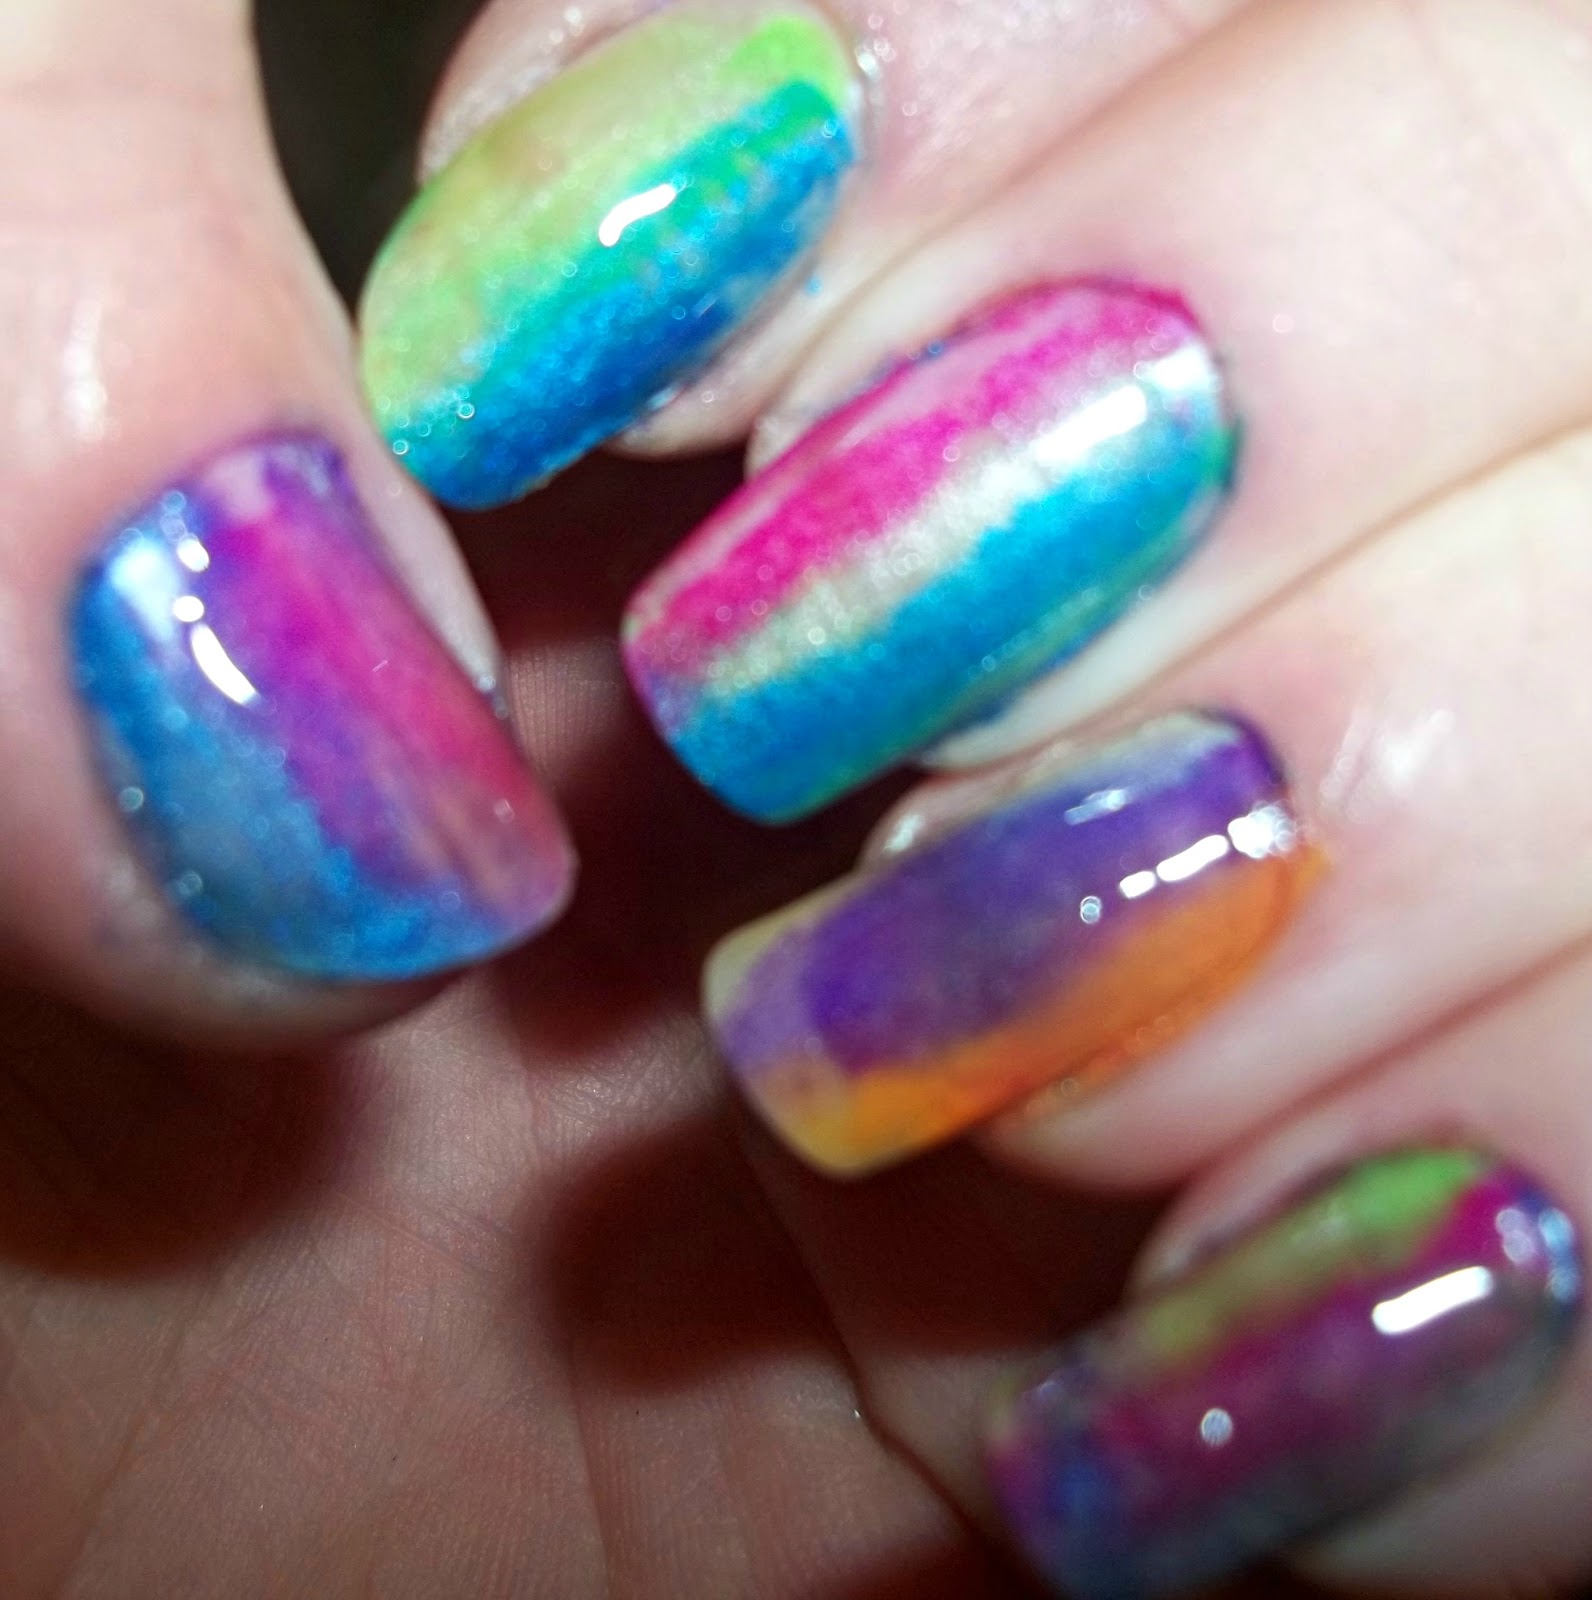 NailsnBling: Sponge Rainbow Colored Nails